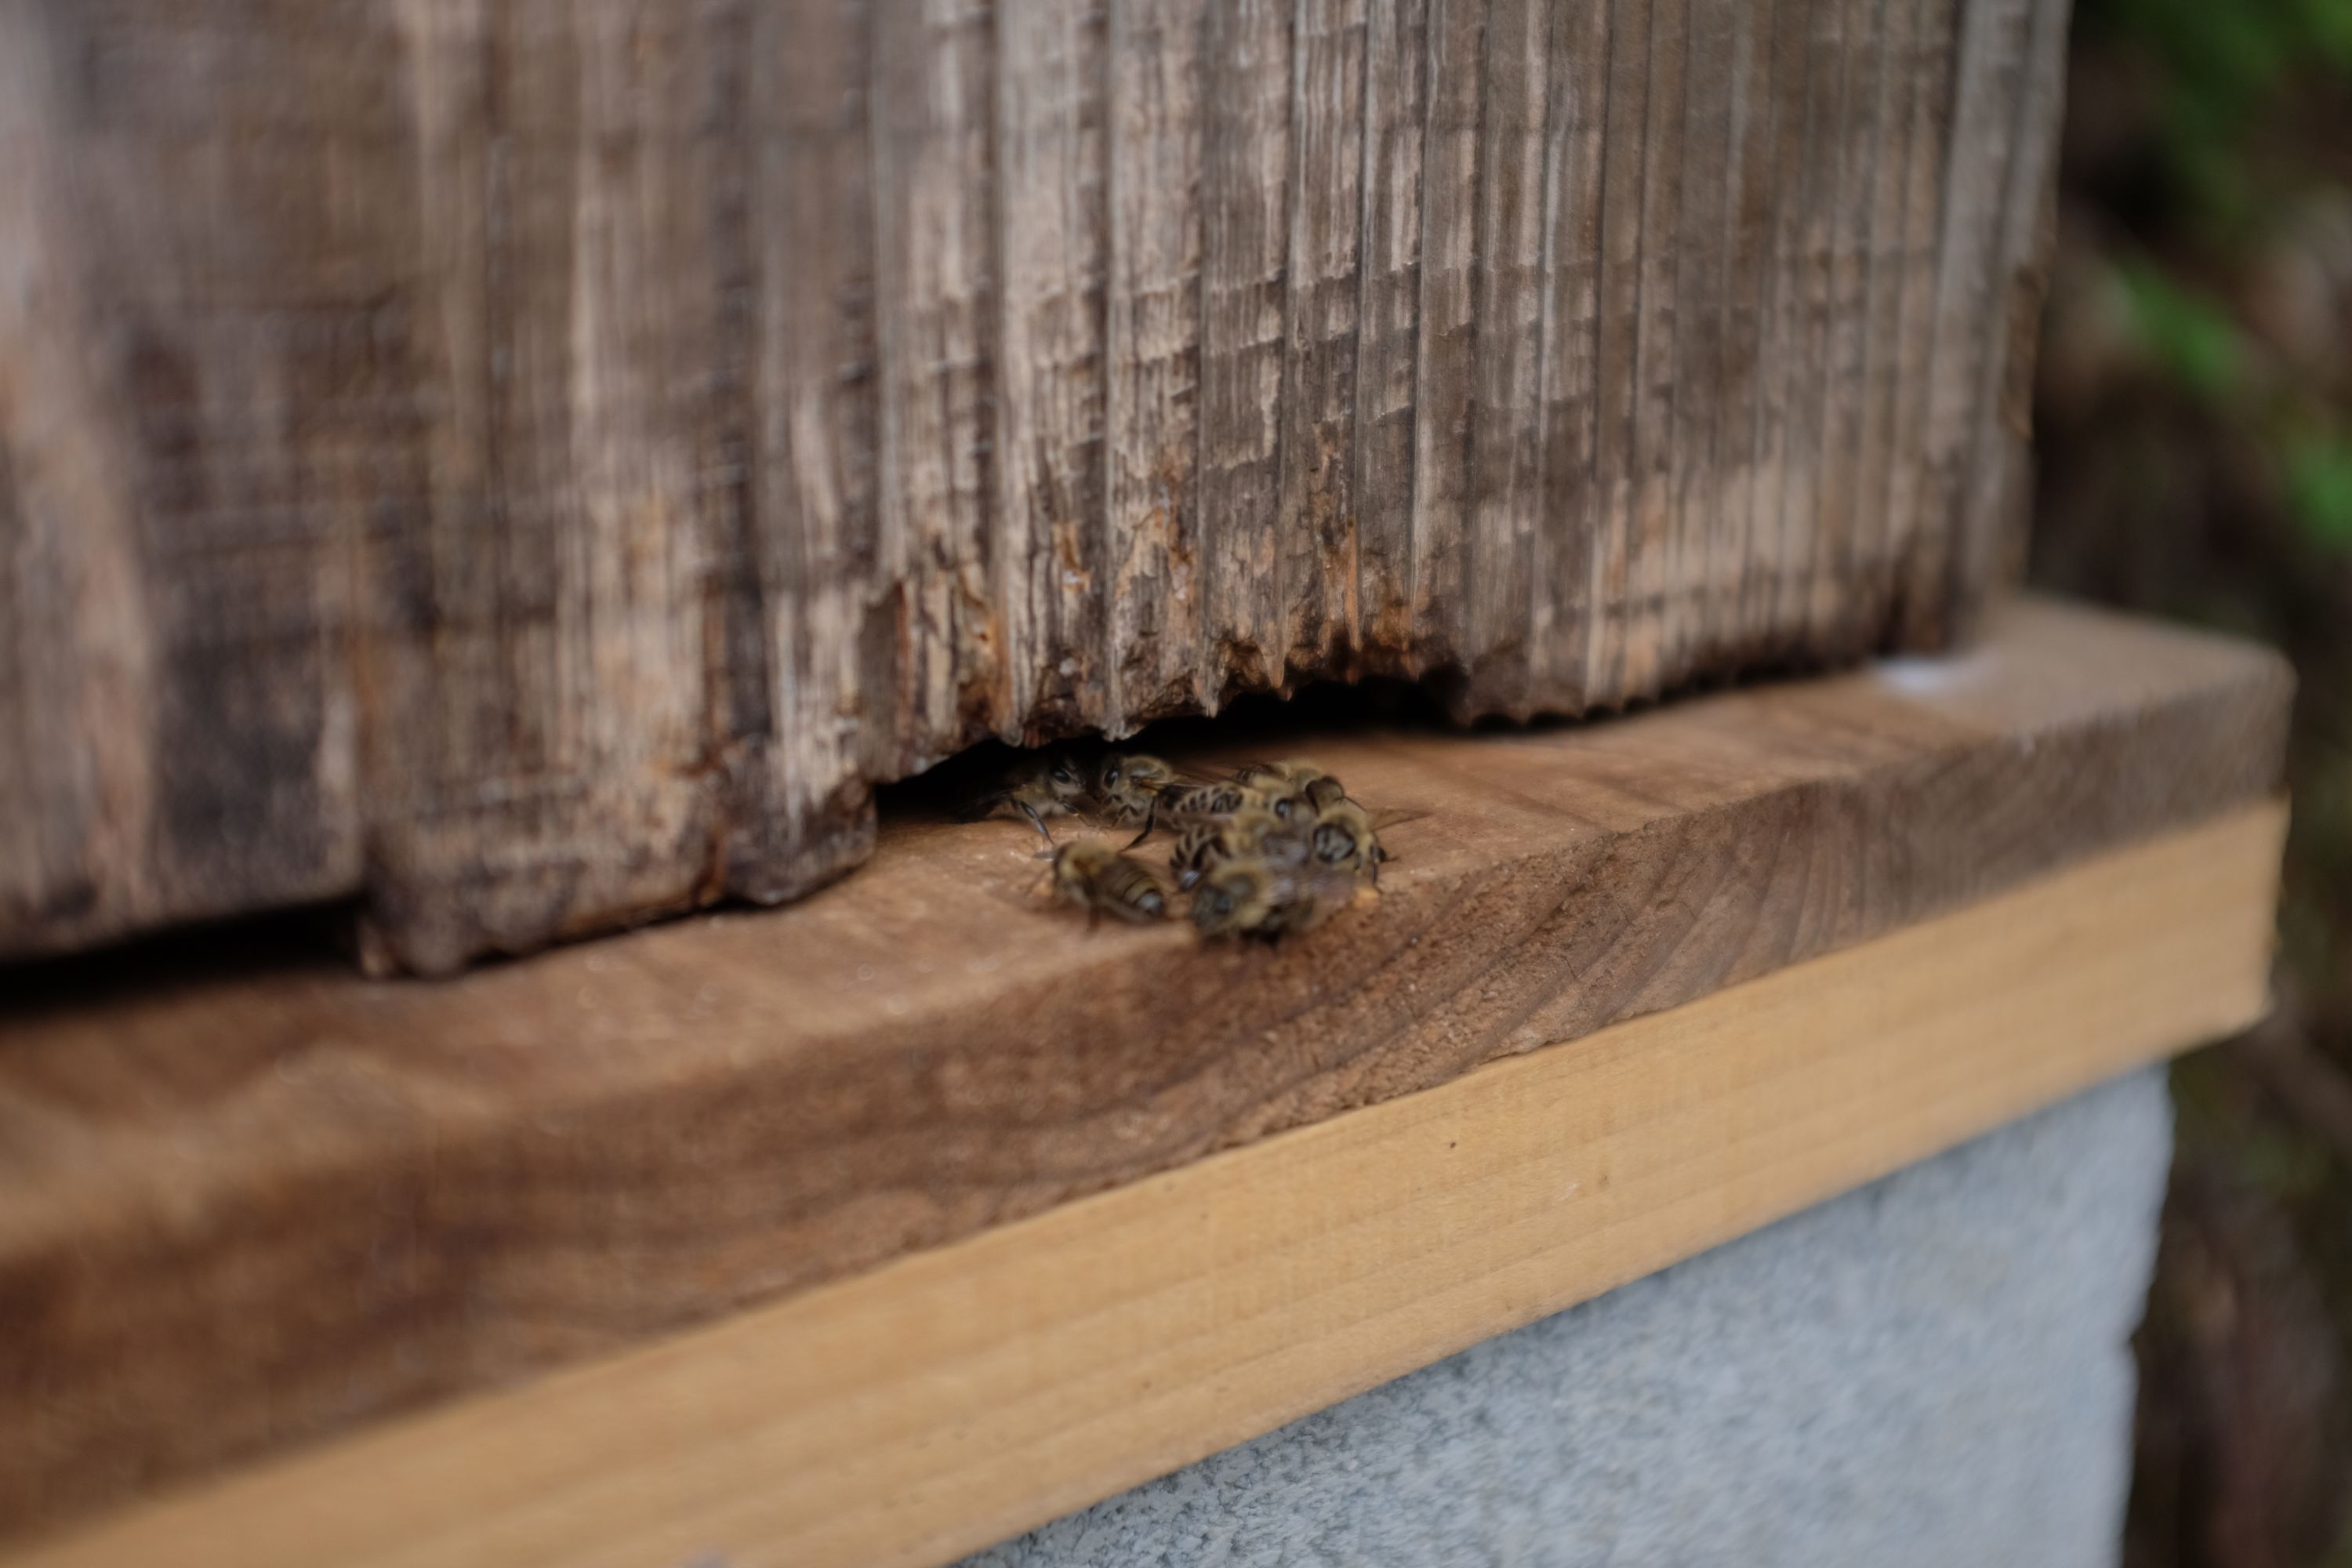 Japanese honeybees at the entrance of their hive.